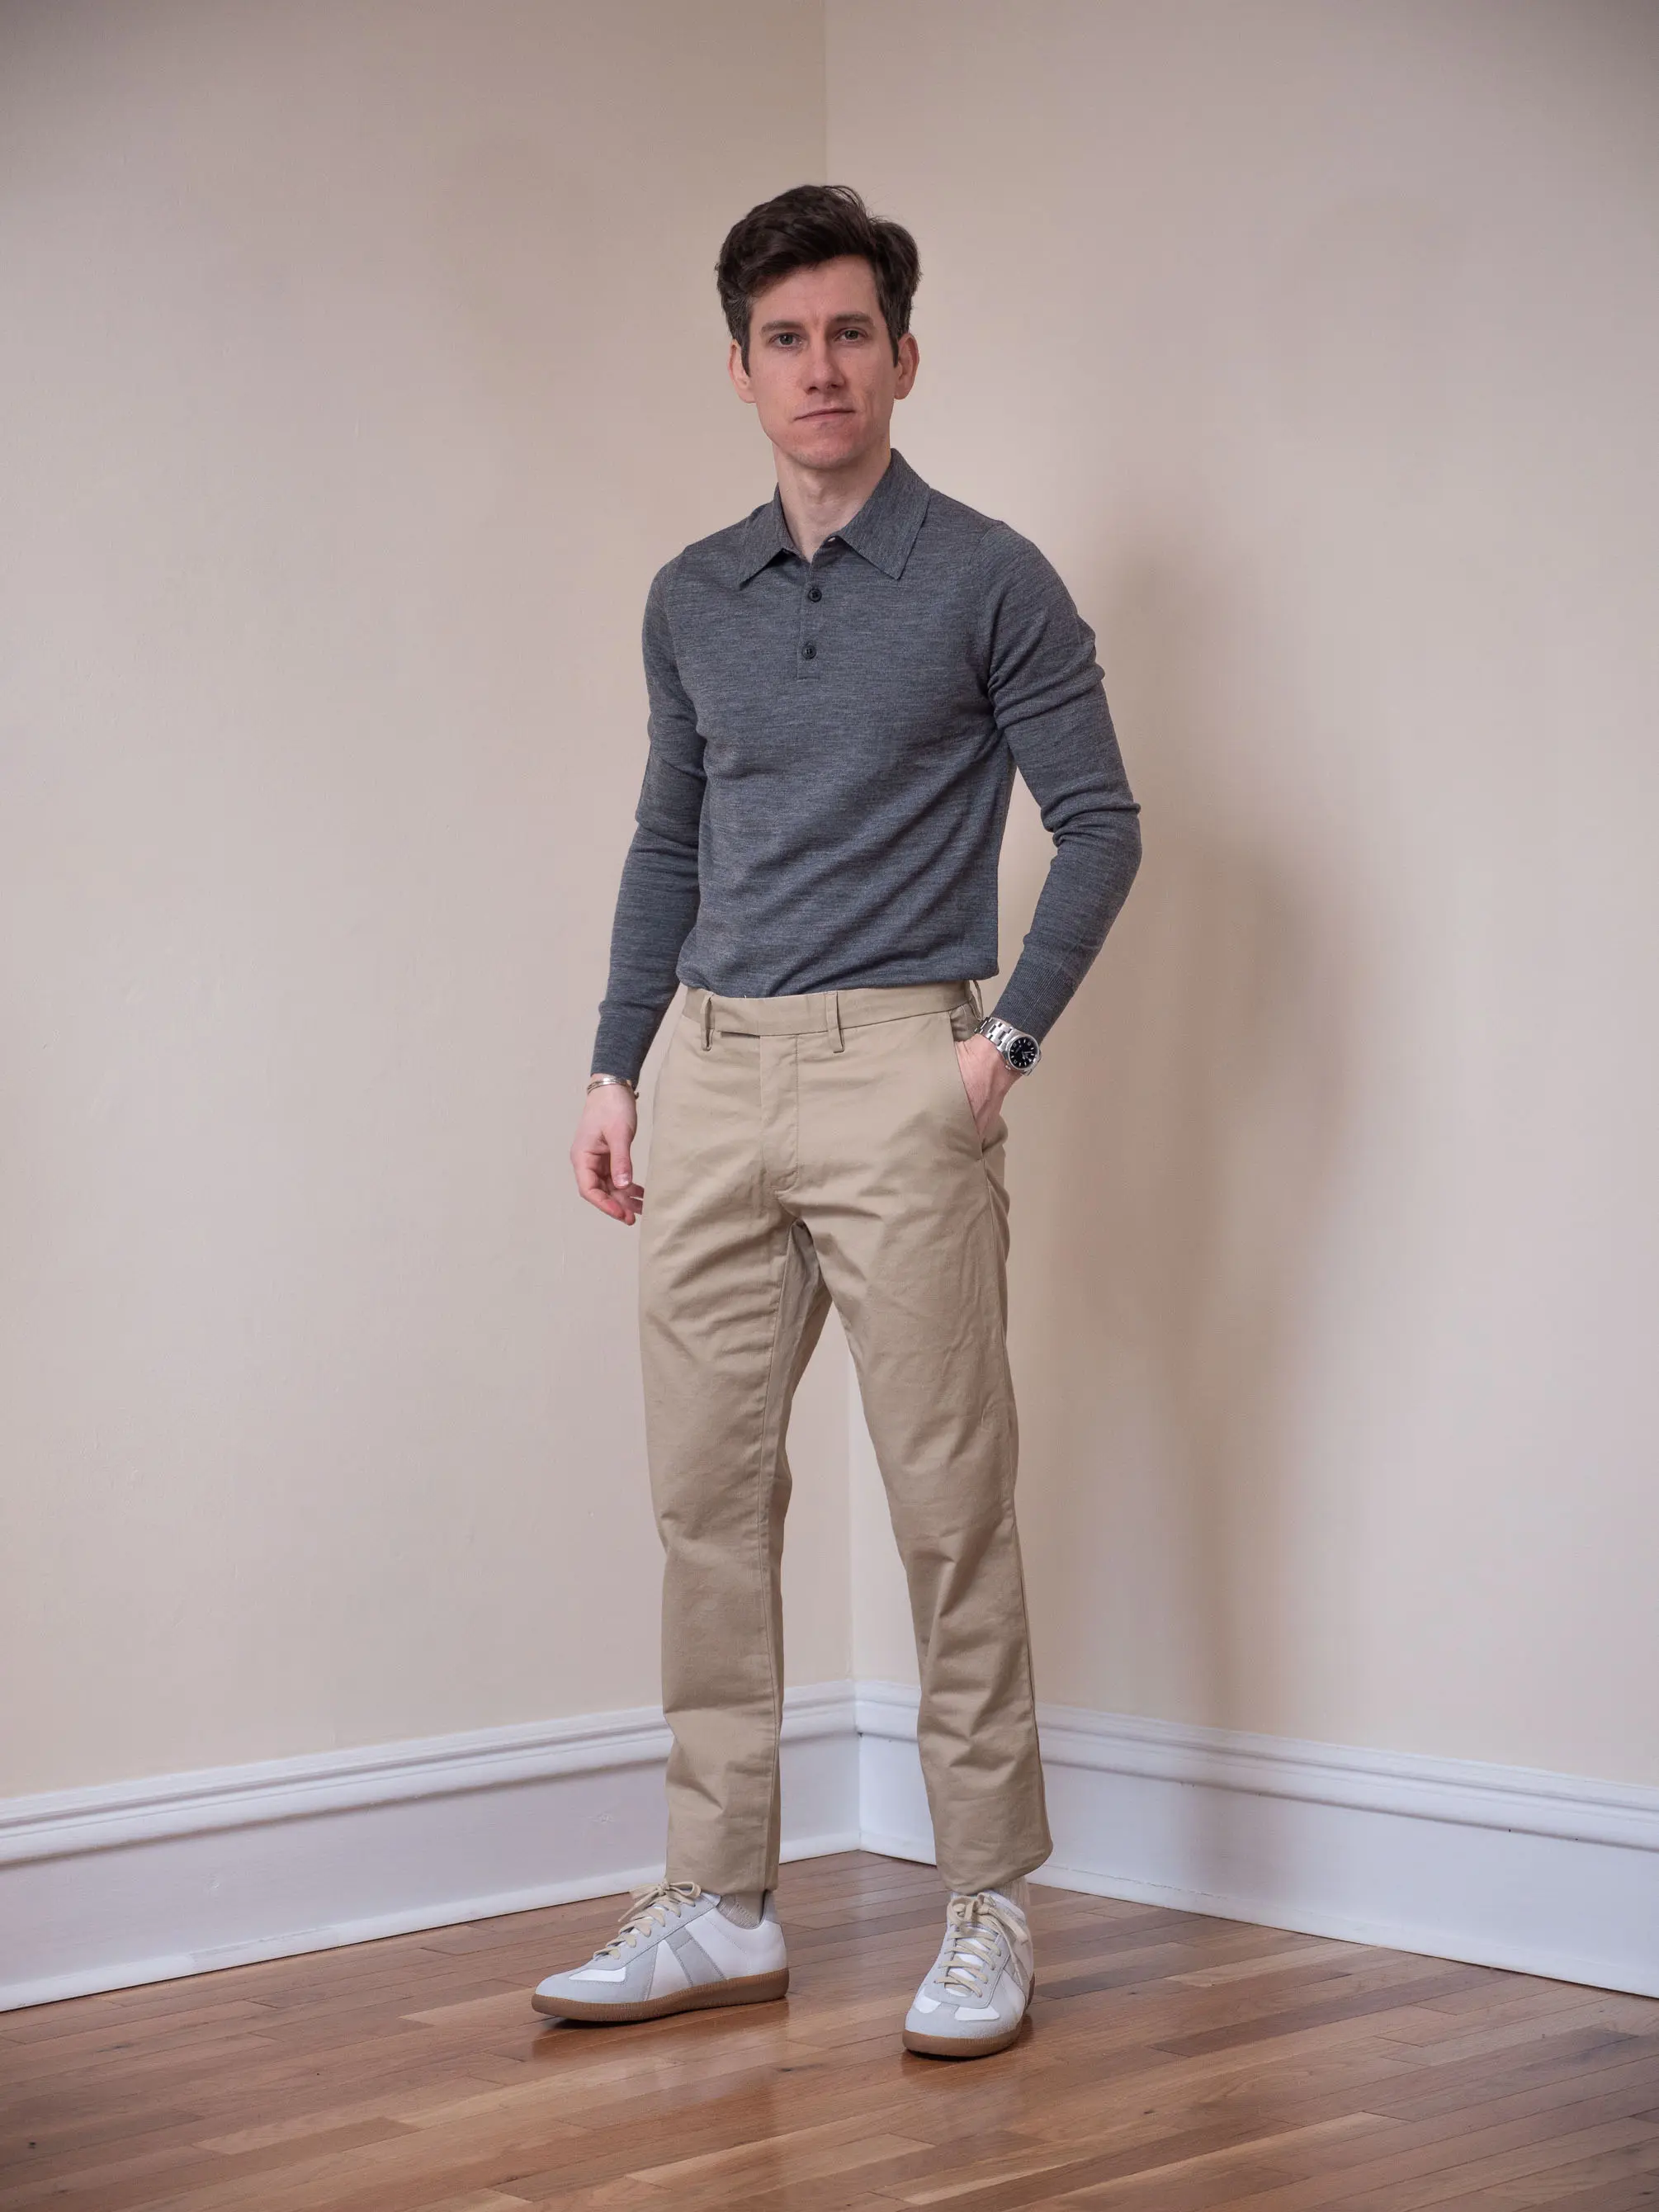 loop pair Stand up instead How to Wear Chinos: Everything You Need to Know